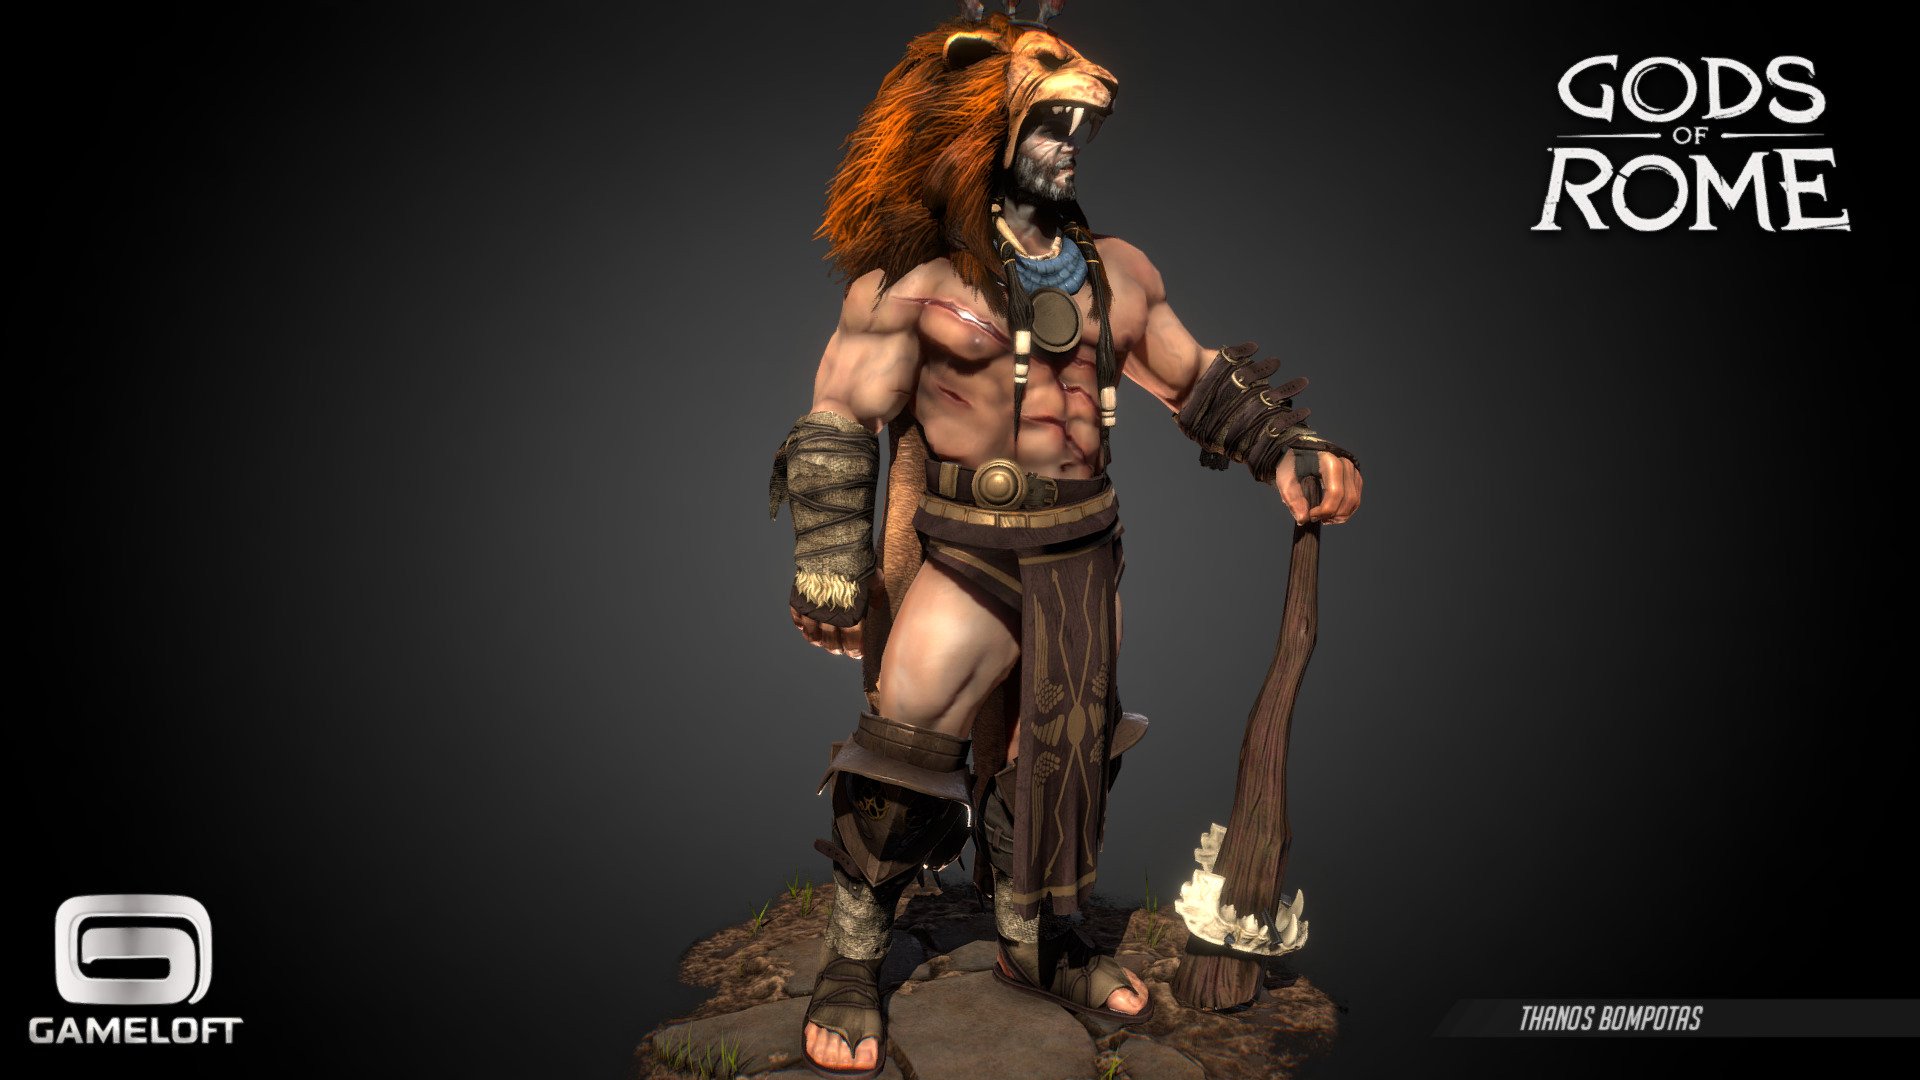 In-game character model I made for Gods of Rome game, produced by Gameloft&lsquo;s Madrid studio. 




Concept by Alexandre Chaudre https://www.artstation.com/eyardt



Programs used for production:

3dsMax

ZBrush

Substance Painter

Photoshop - Hercules - Gods of Rome - 3D model by Thanos Bompotas (@ibizanhound) 3d model